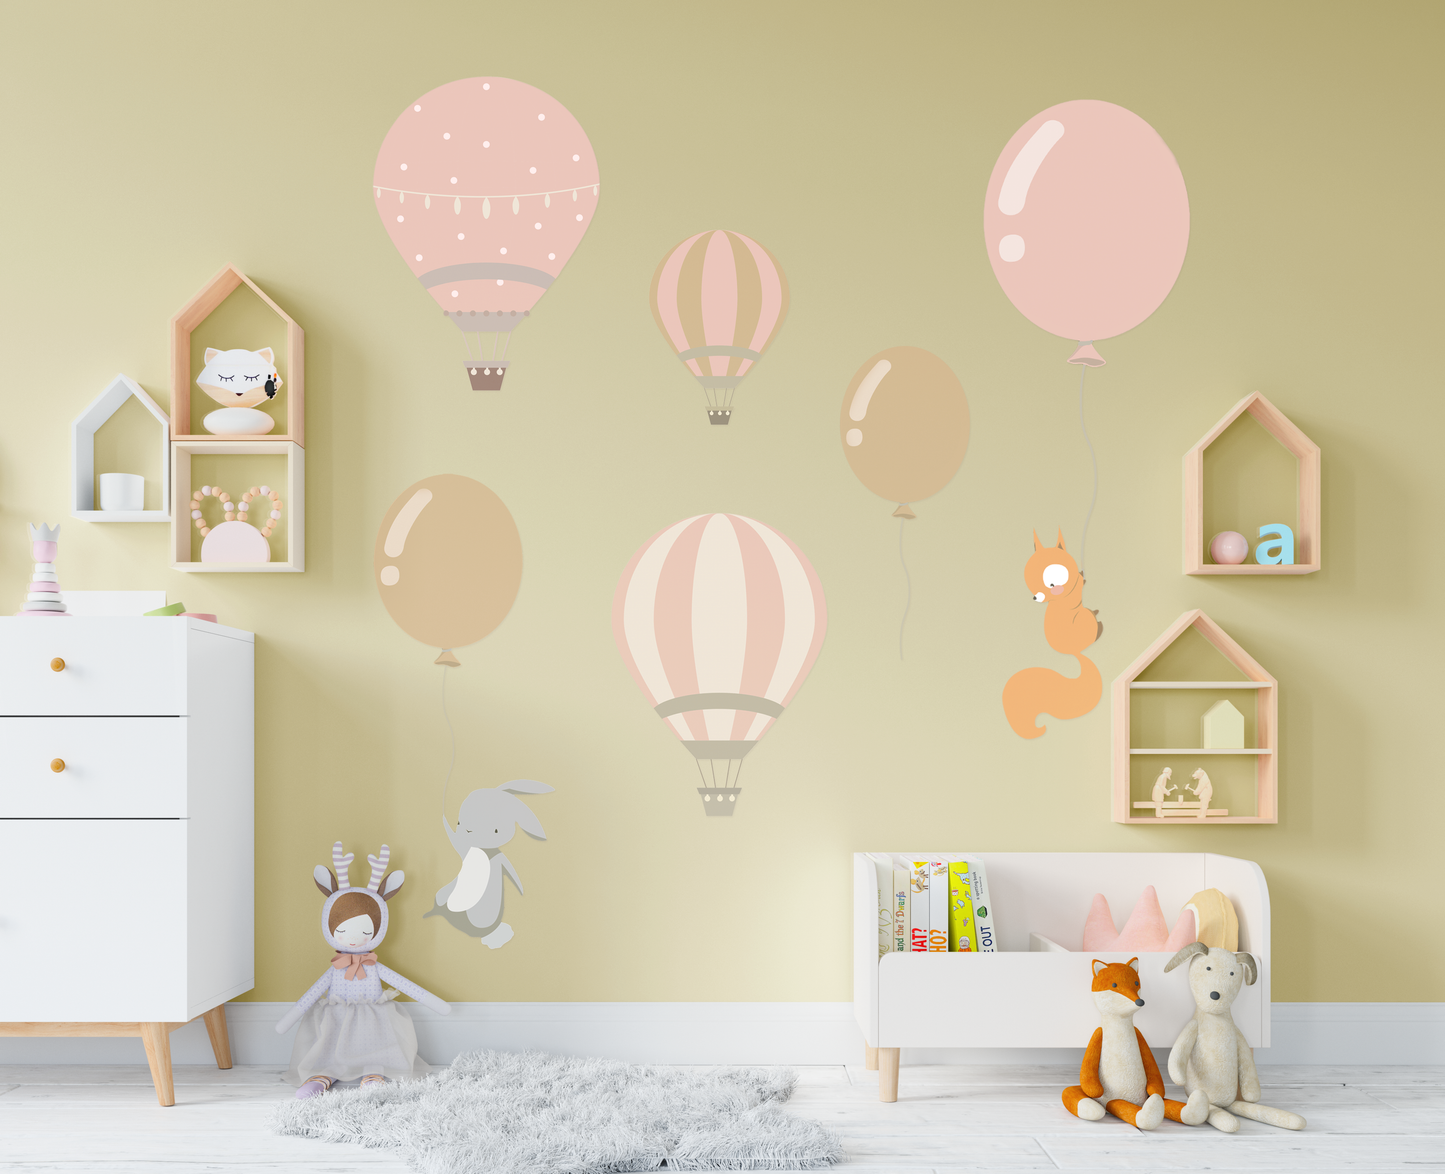 Hot Air Balloons and Animals - Sticker Decals